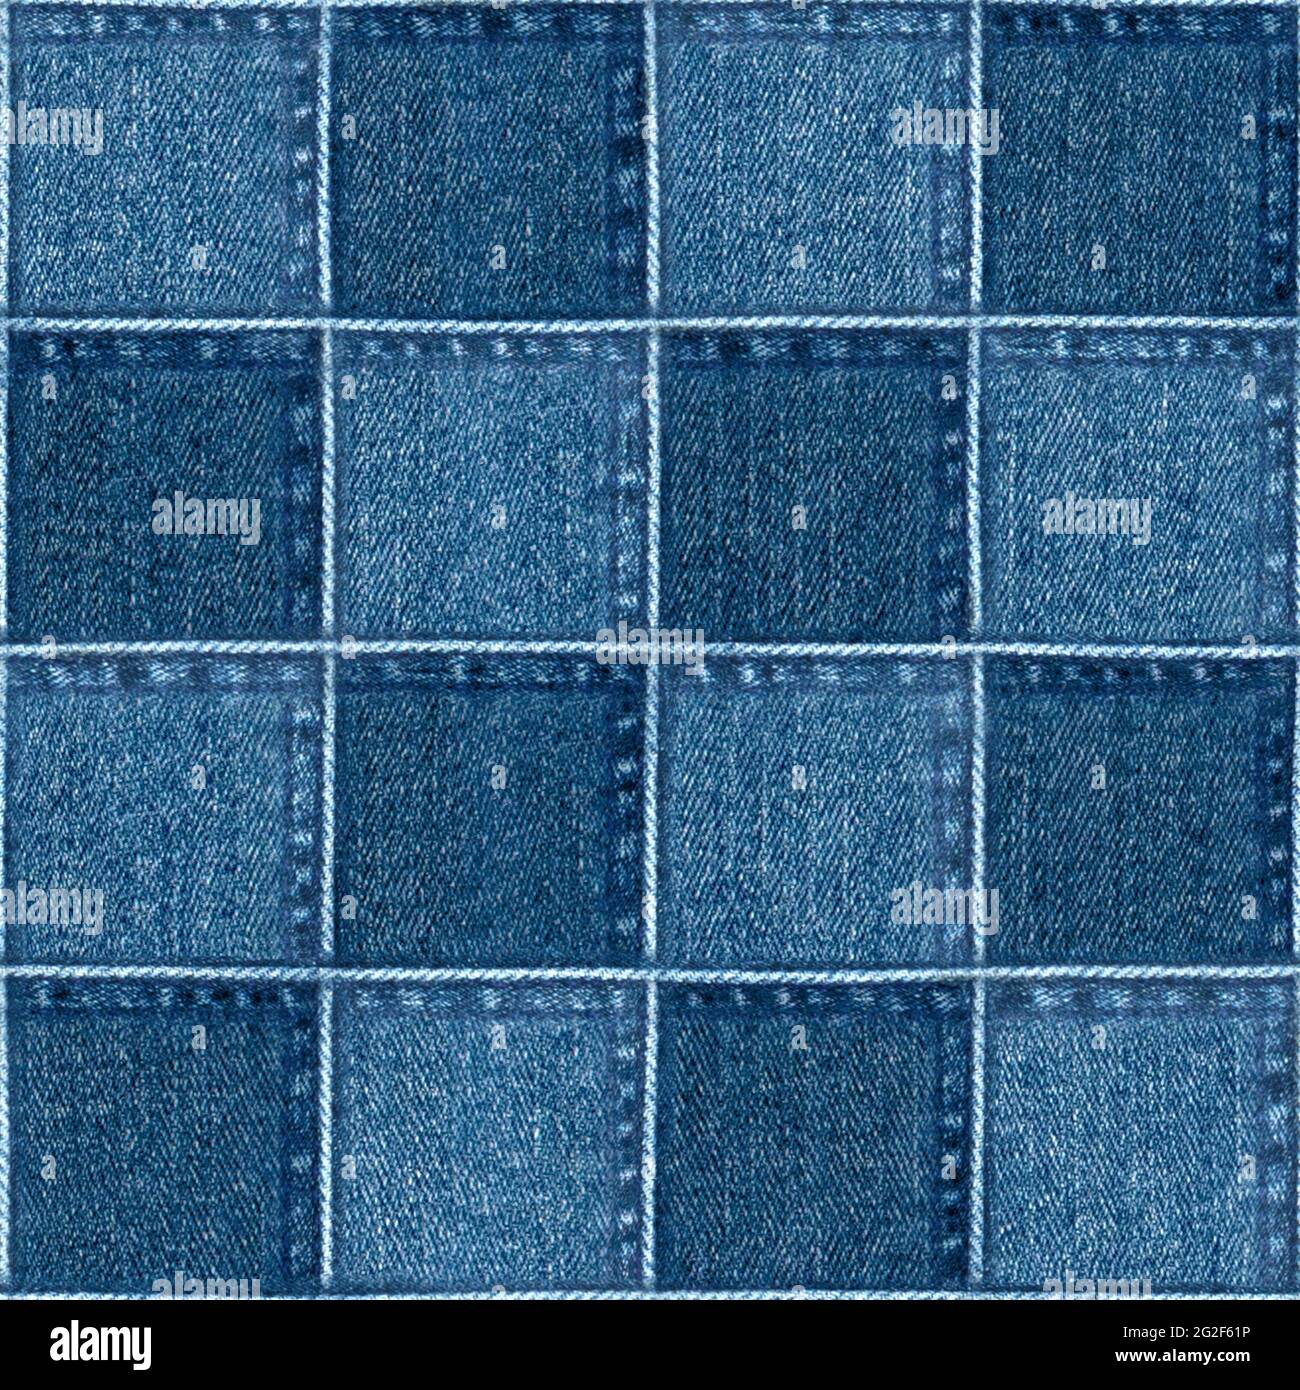 Seamless Jeans Pattern-blue Denim Texture. Denim Patchwork Material Stock  Photo - Image of jeans, abstract: 200962846